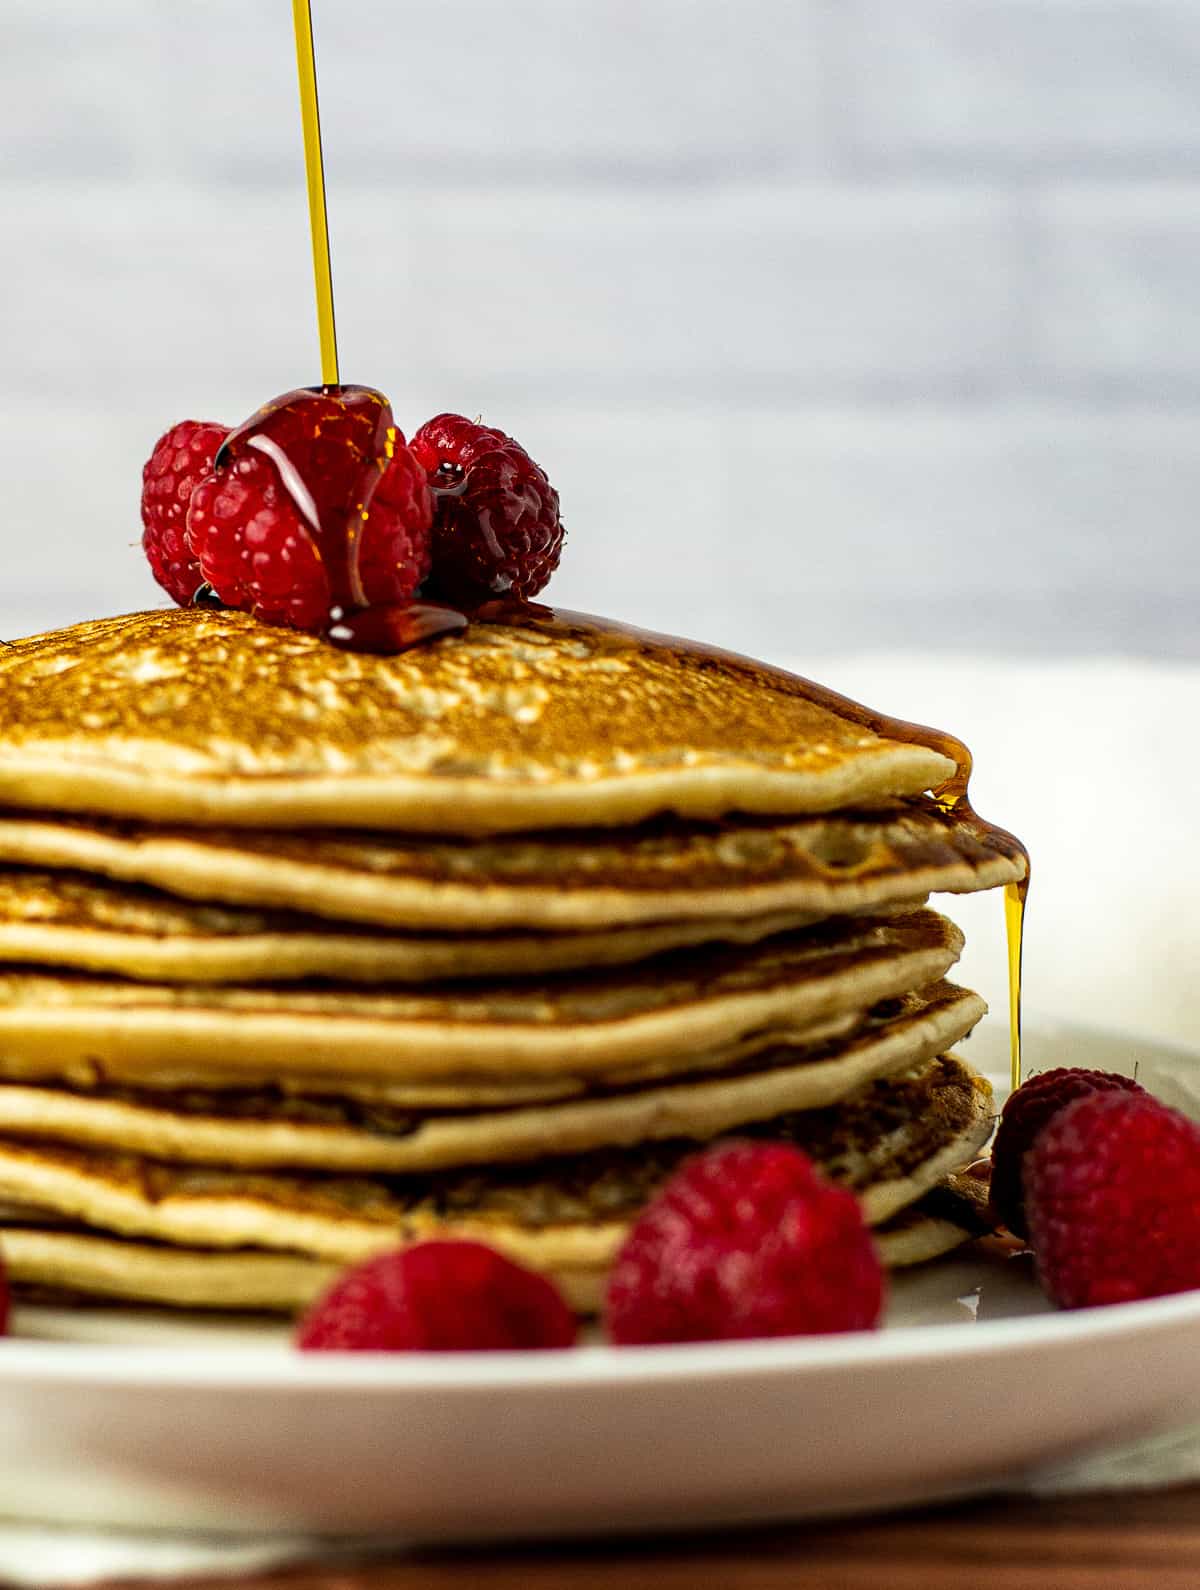 Pancakes with raspberries and maple syrup